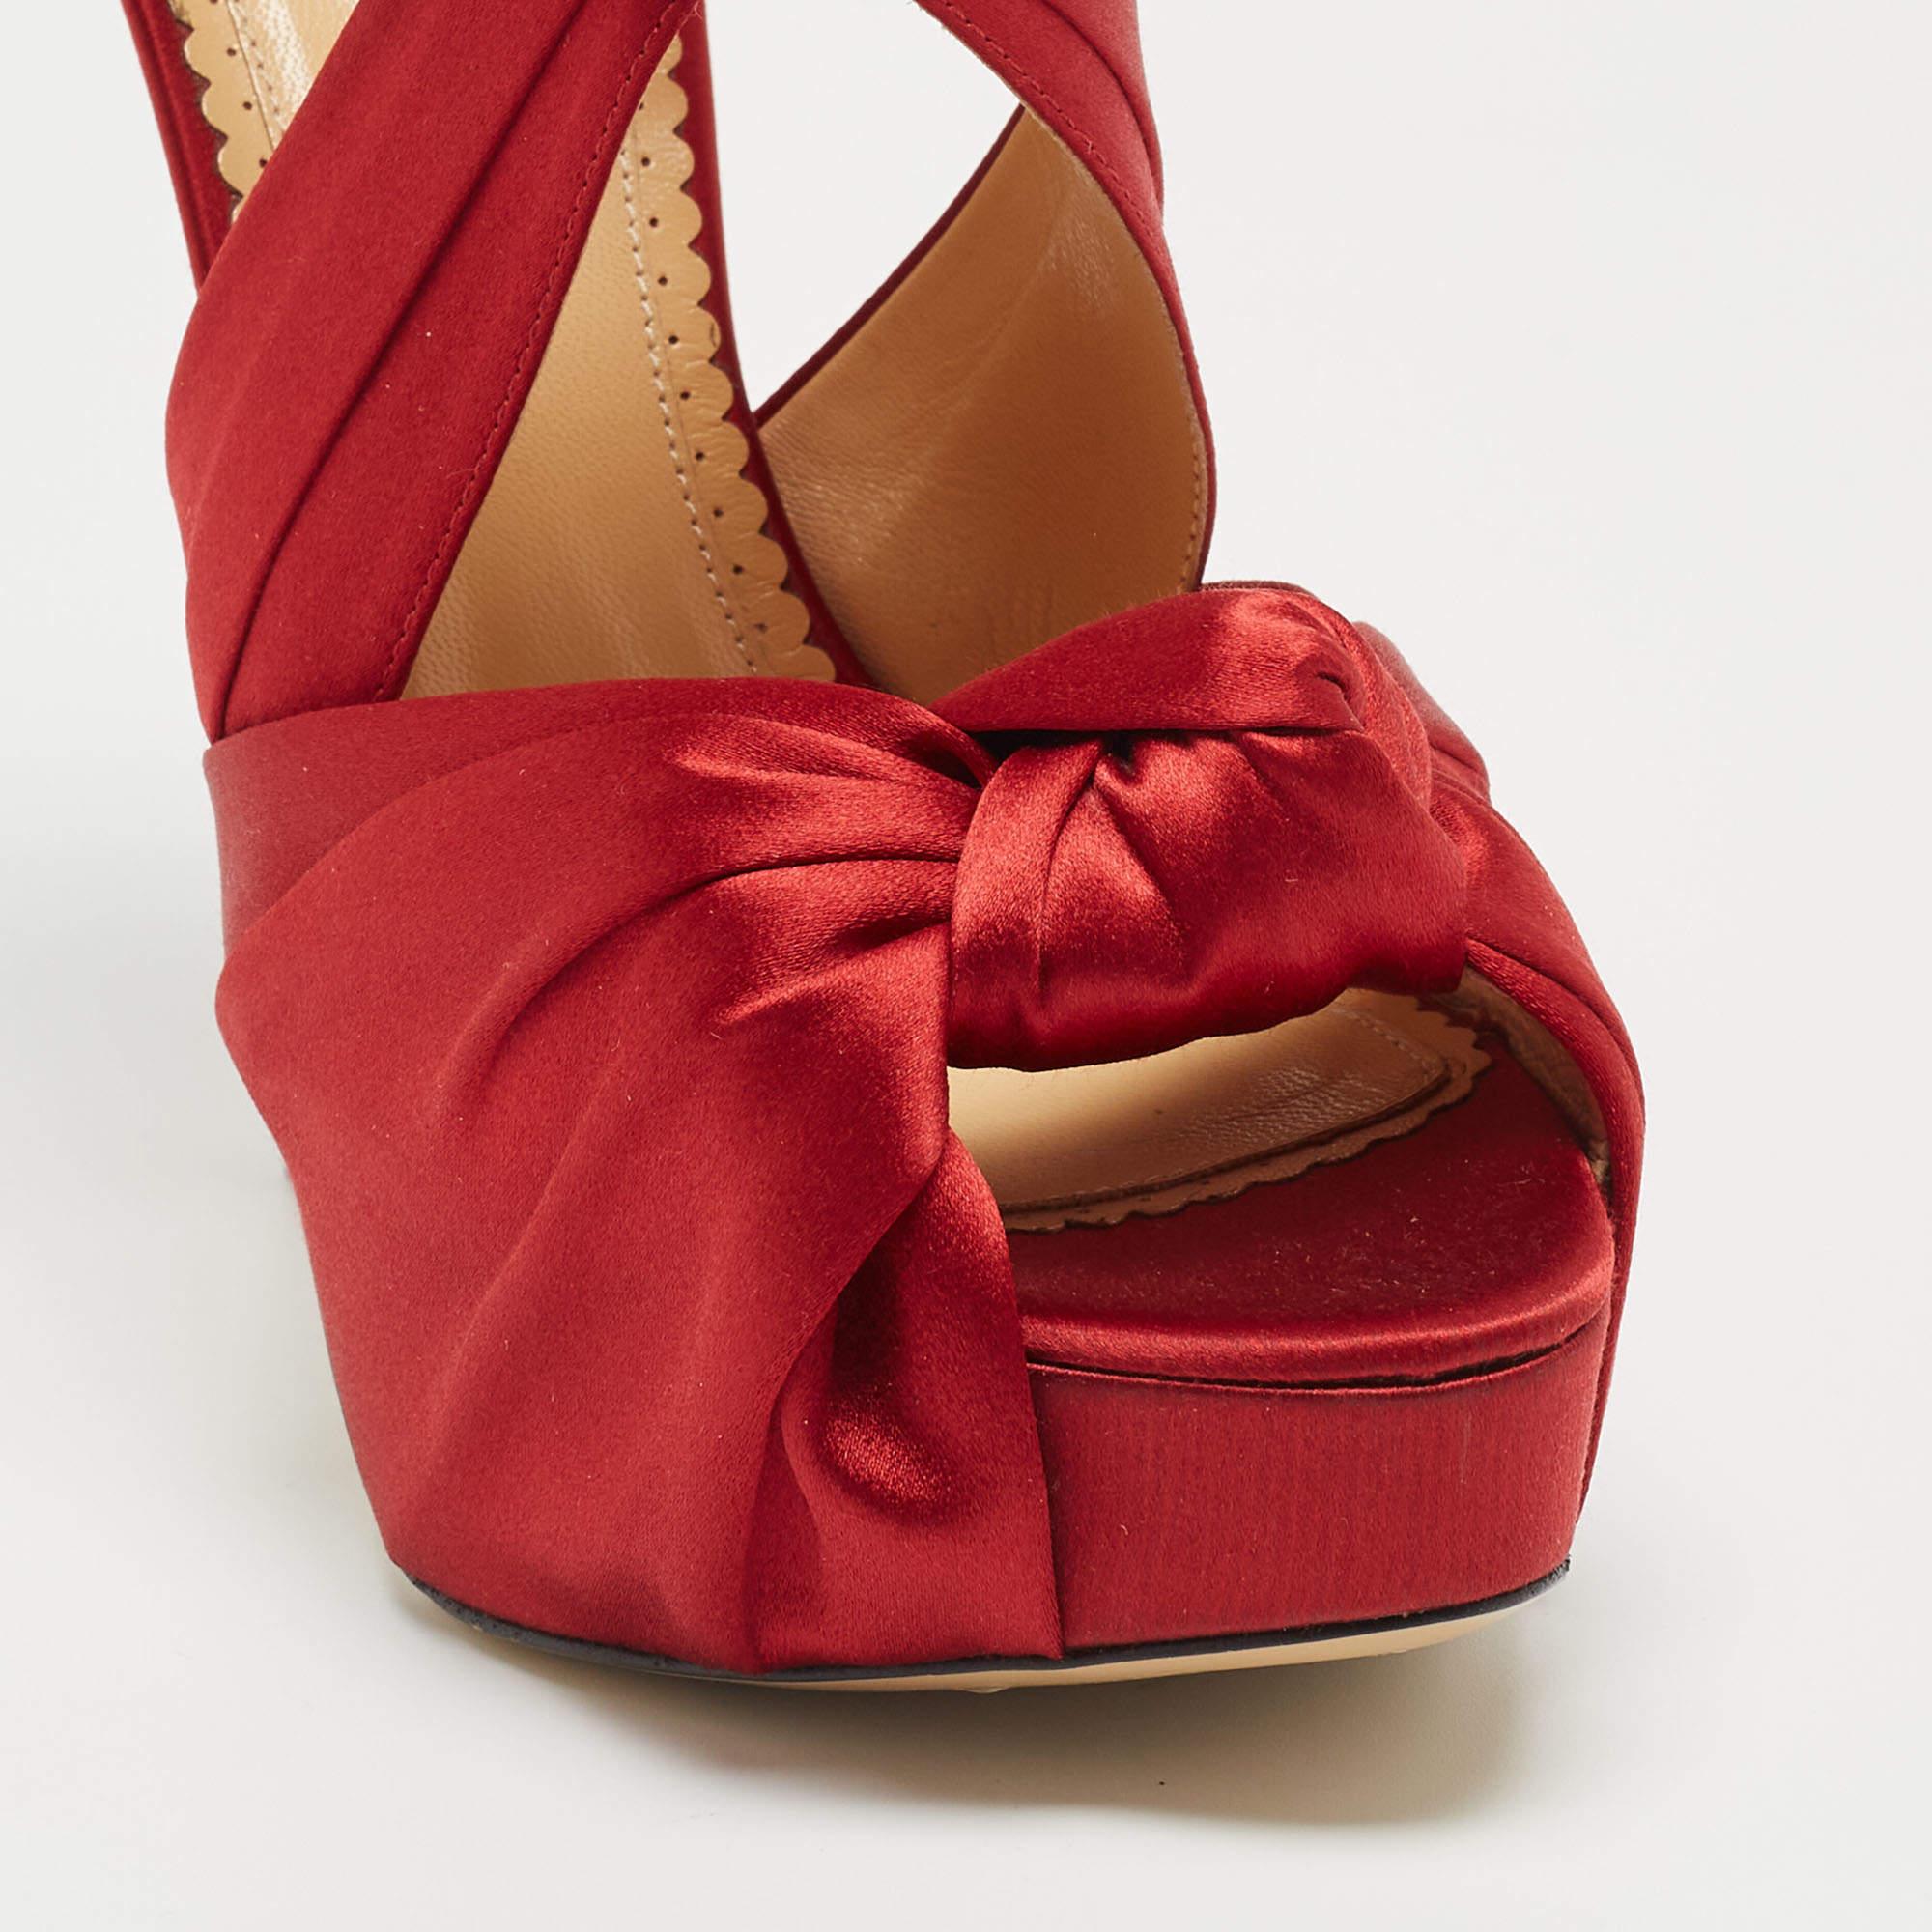 Charlotte Olympia Red Satin Andrea Knotted Platform Sandals Size 41 3